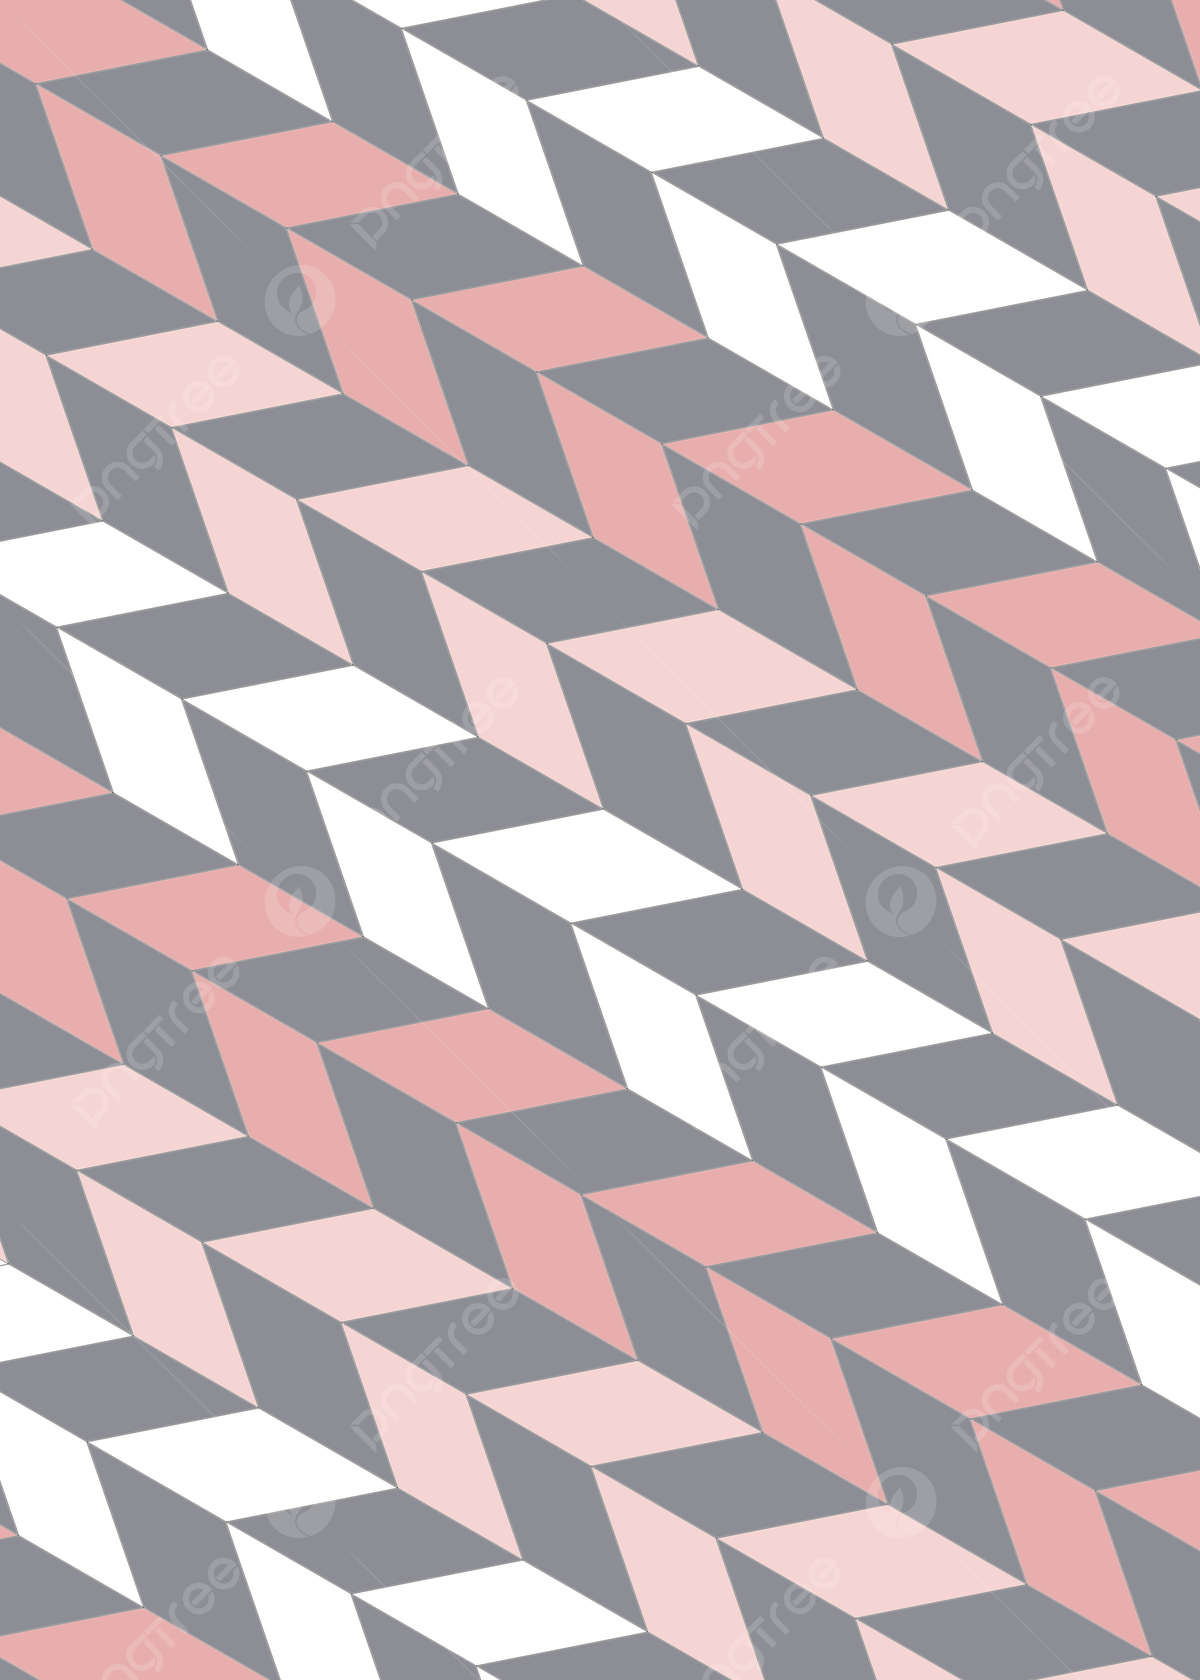 Striped Geometric Aesthetic Background Abstract Art Wallpaper Image For Free Download